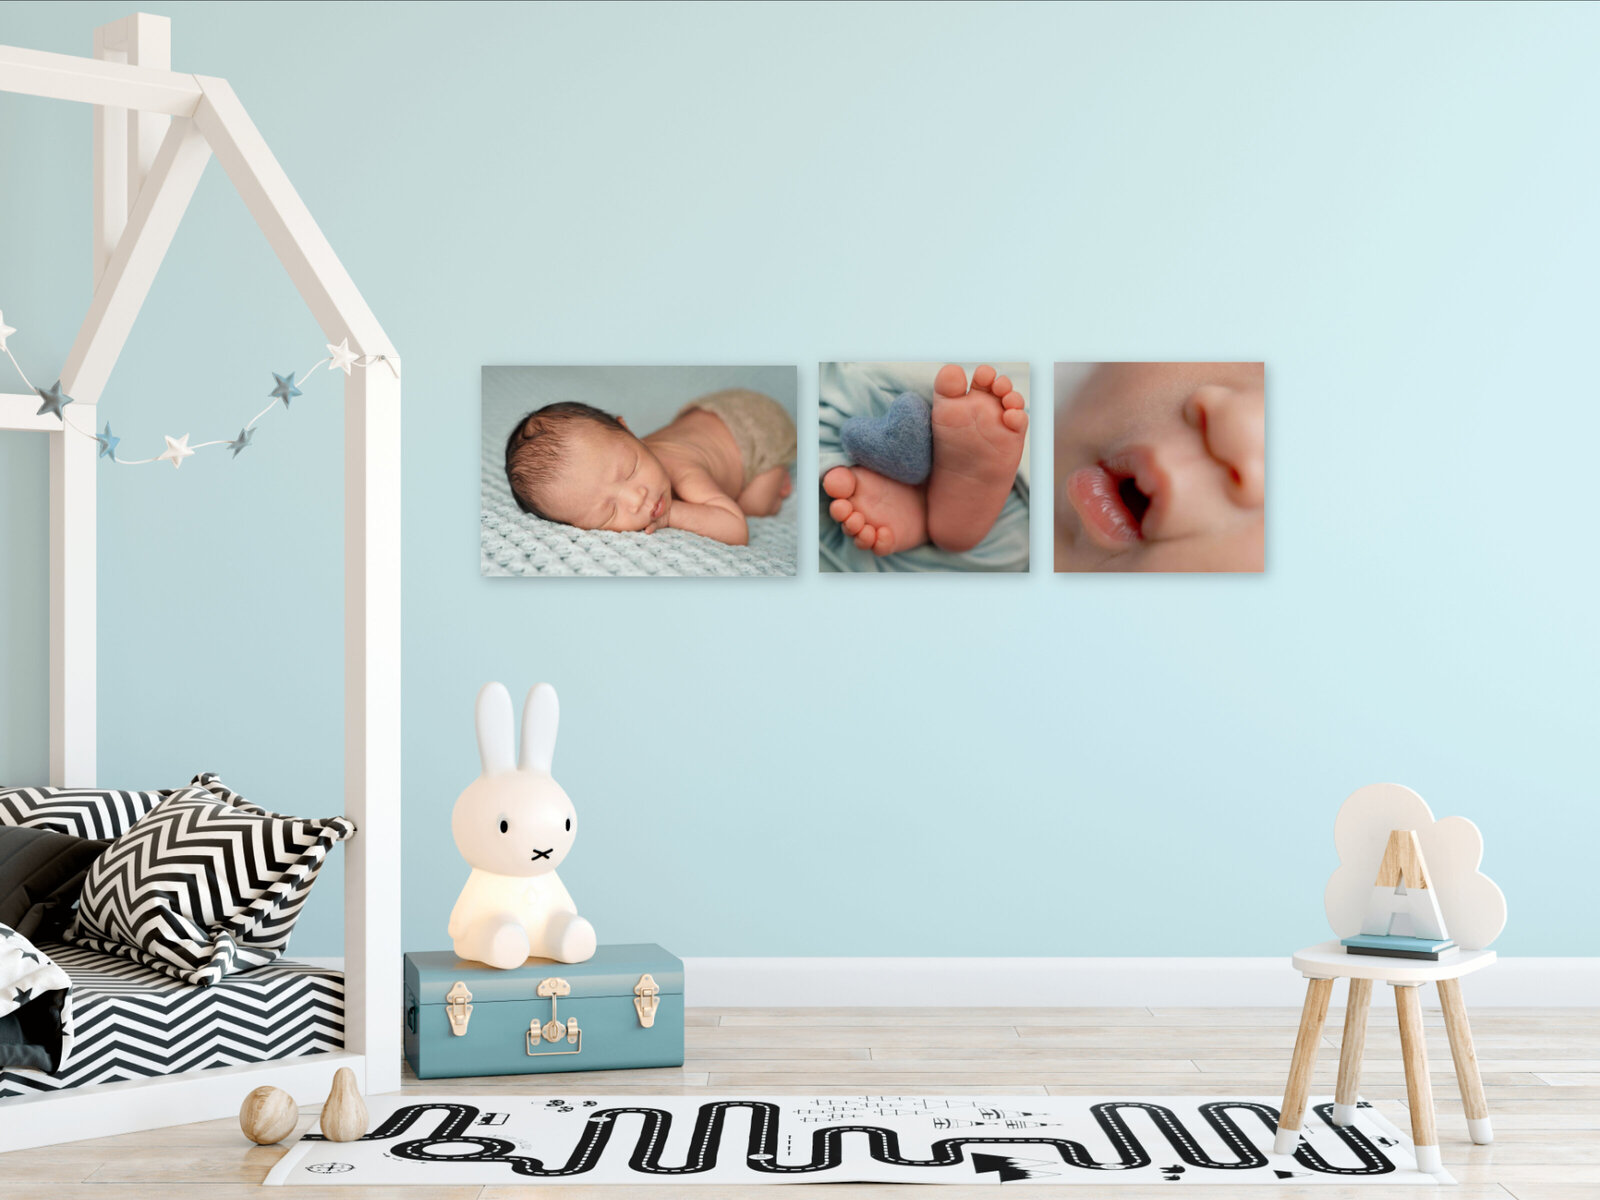 Newborn baby pictures hanging in a client's home